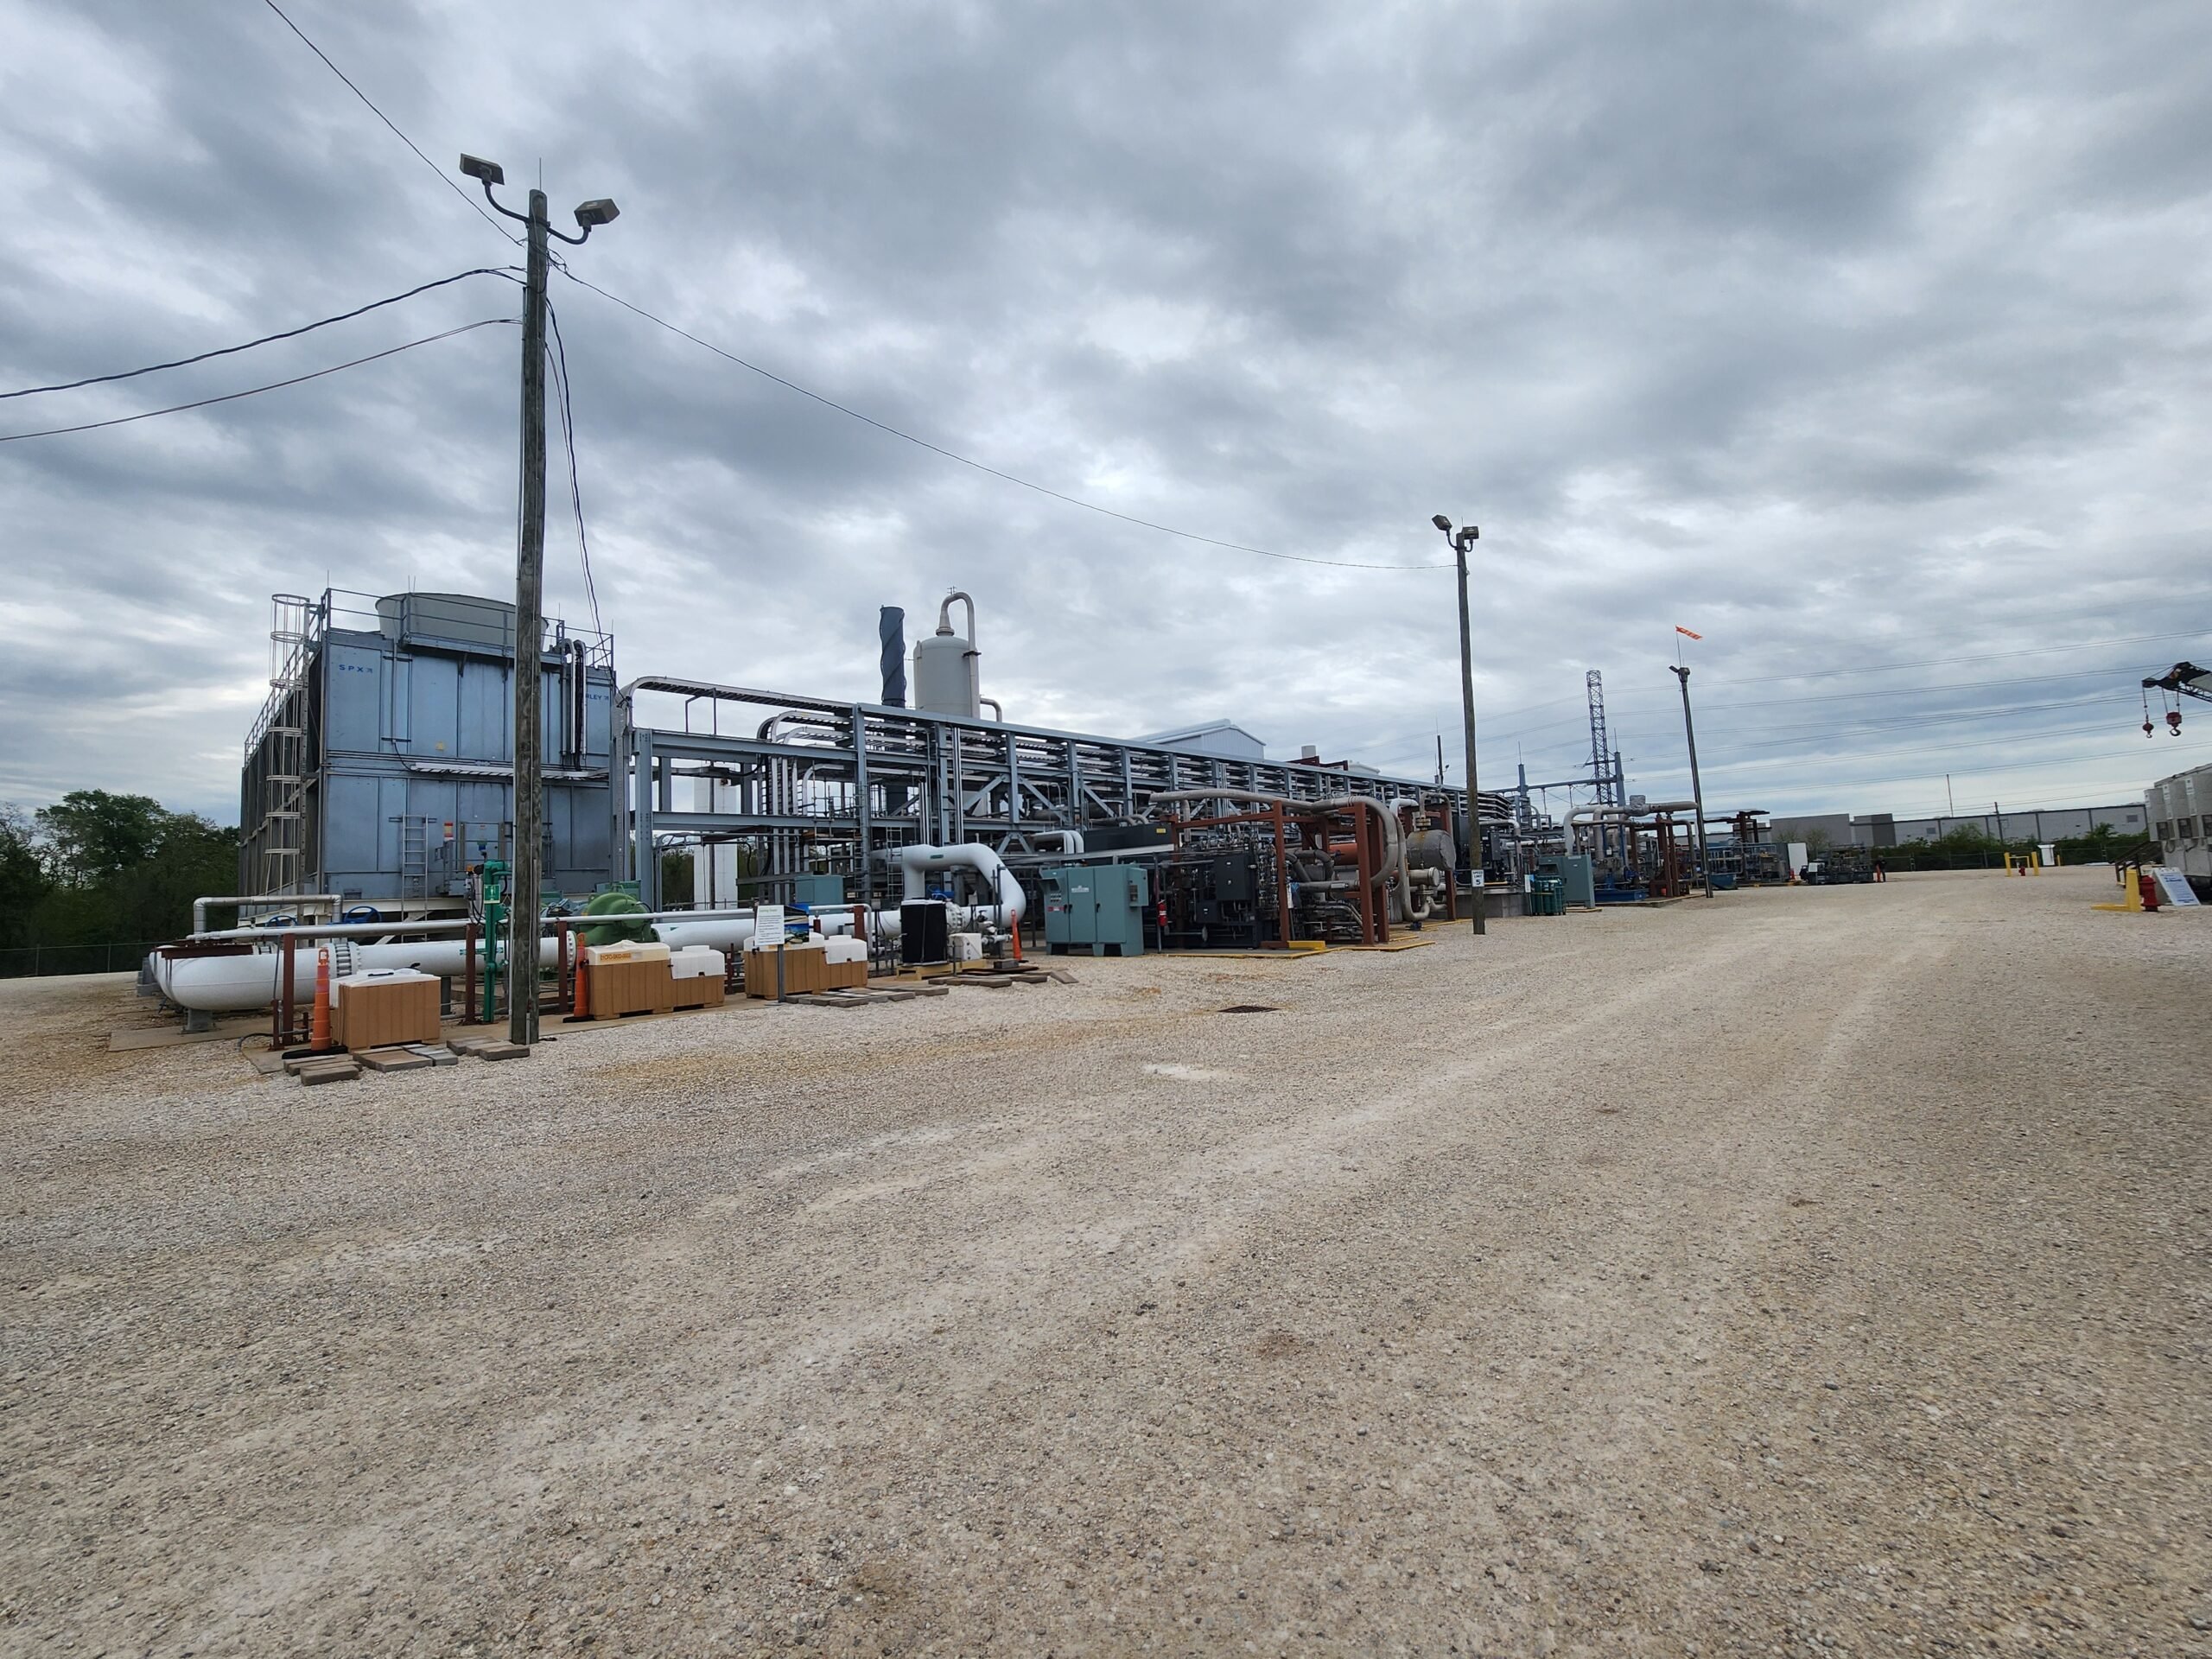 An exterior view of the NET Power demonstration plant in LaPorte, Texas.